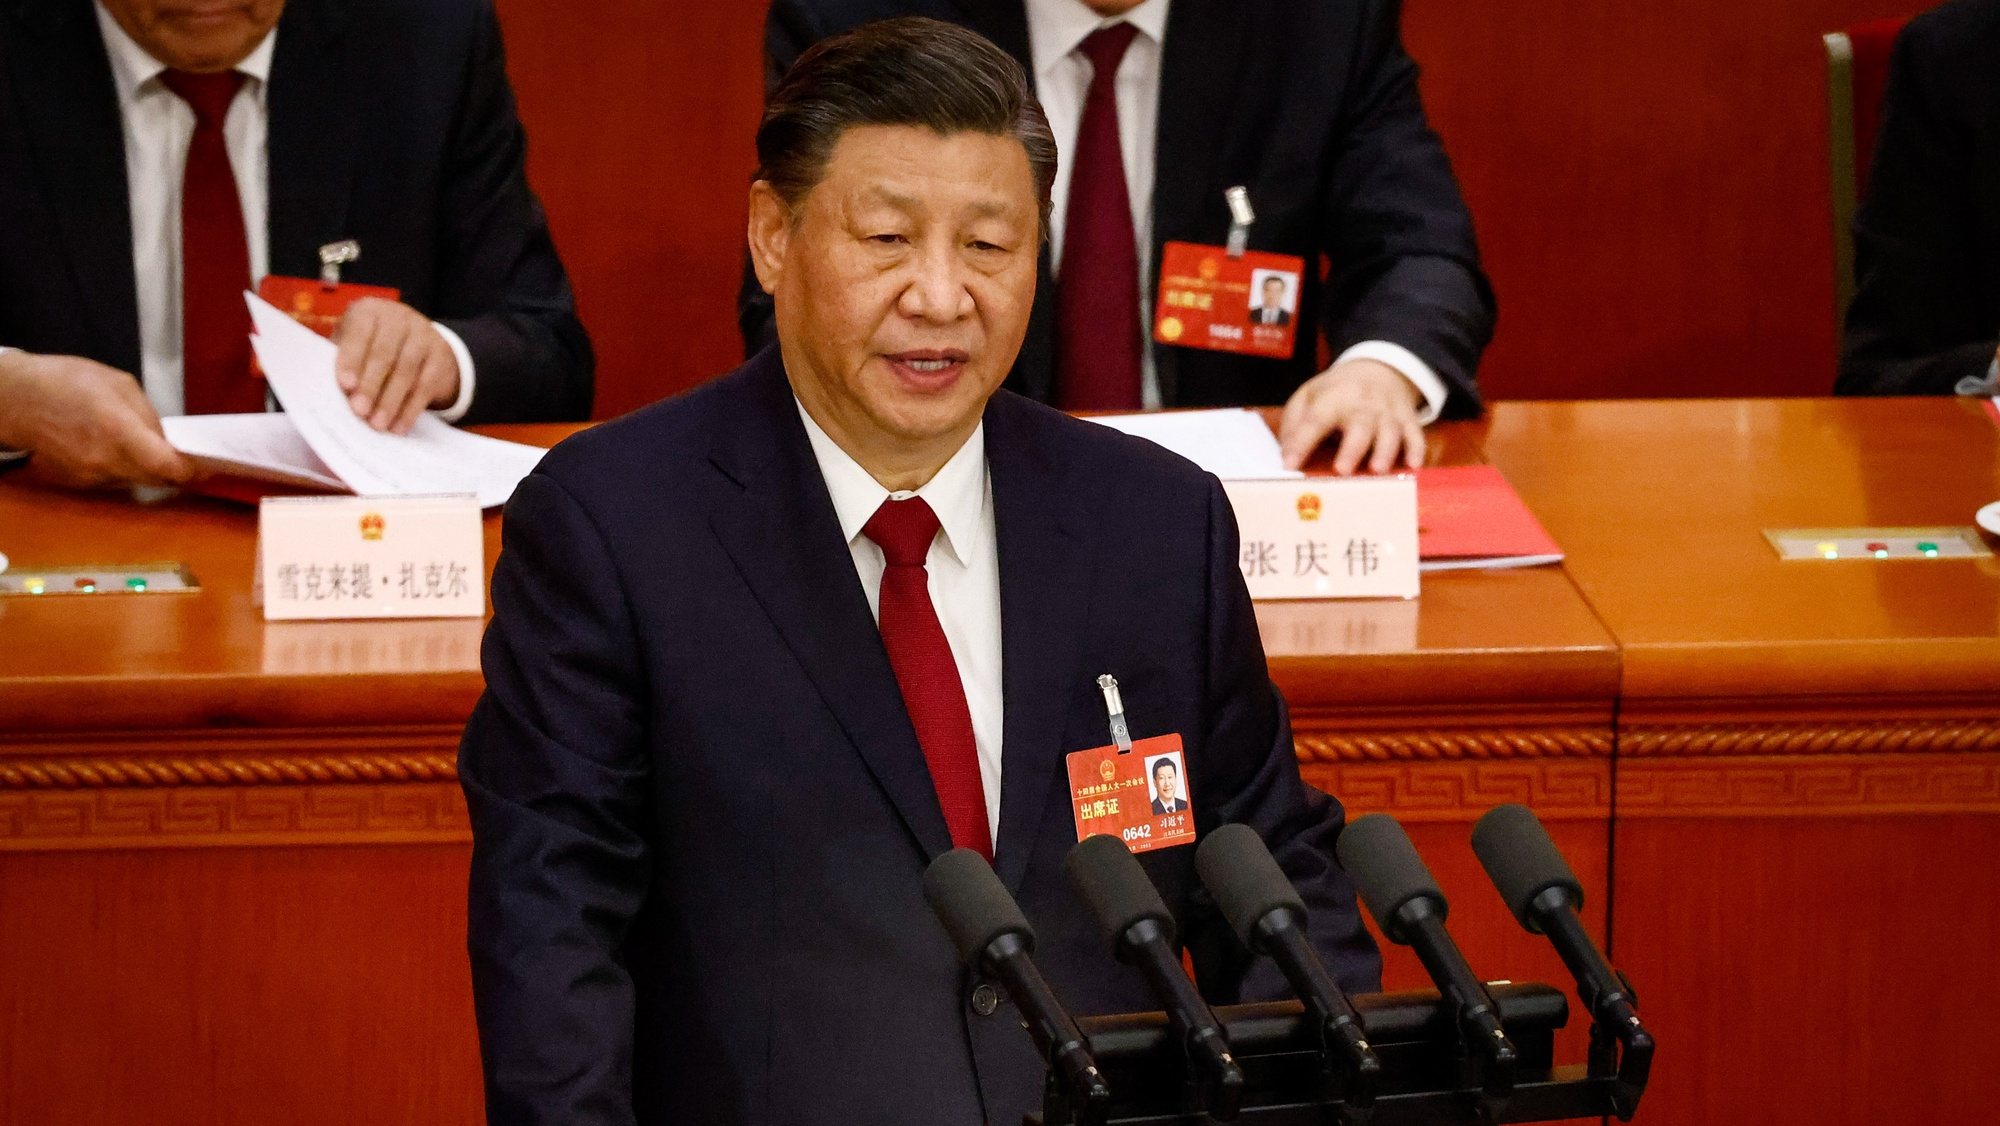 epa10518791 Chinese President Xi Jinping speaks during the Closing Session of the National People&#039;s Congress (NPC) at the Great Hall of the People, in Beijing, China, 13 March 2023. China holds two major annual political meetings, the National People&#039;s Congress (NPC) and the Chinese People&#039;s Political Consultative Conference (CPPCC) which run alongside and together are known as &#039;Lianghui&#039; or &#039;Two Sessions&#039;.  EPA/MARK R. CRISTINO